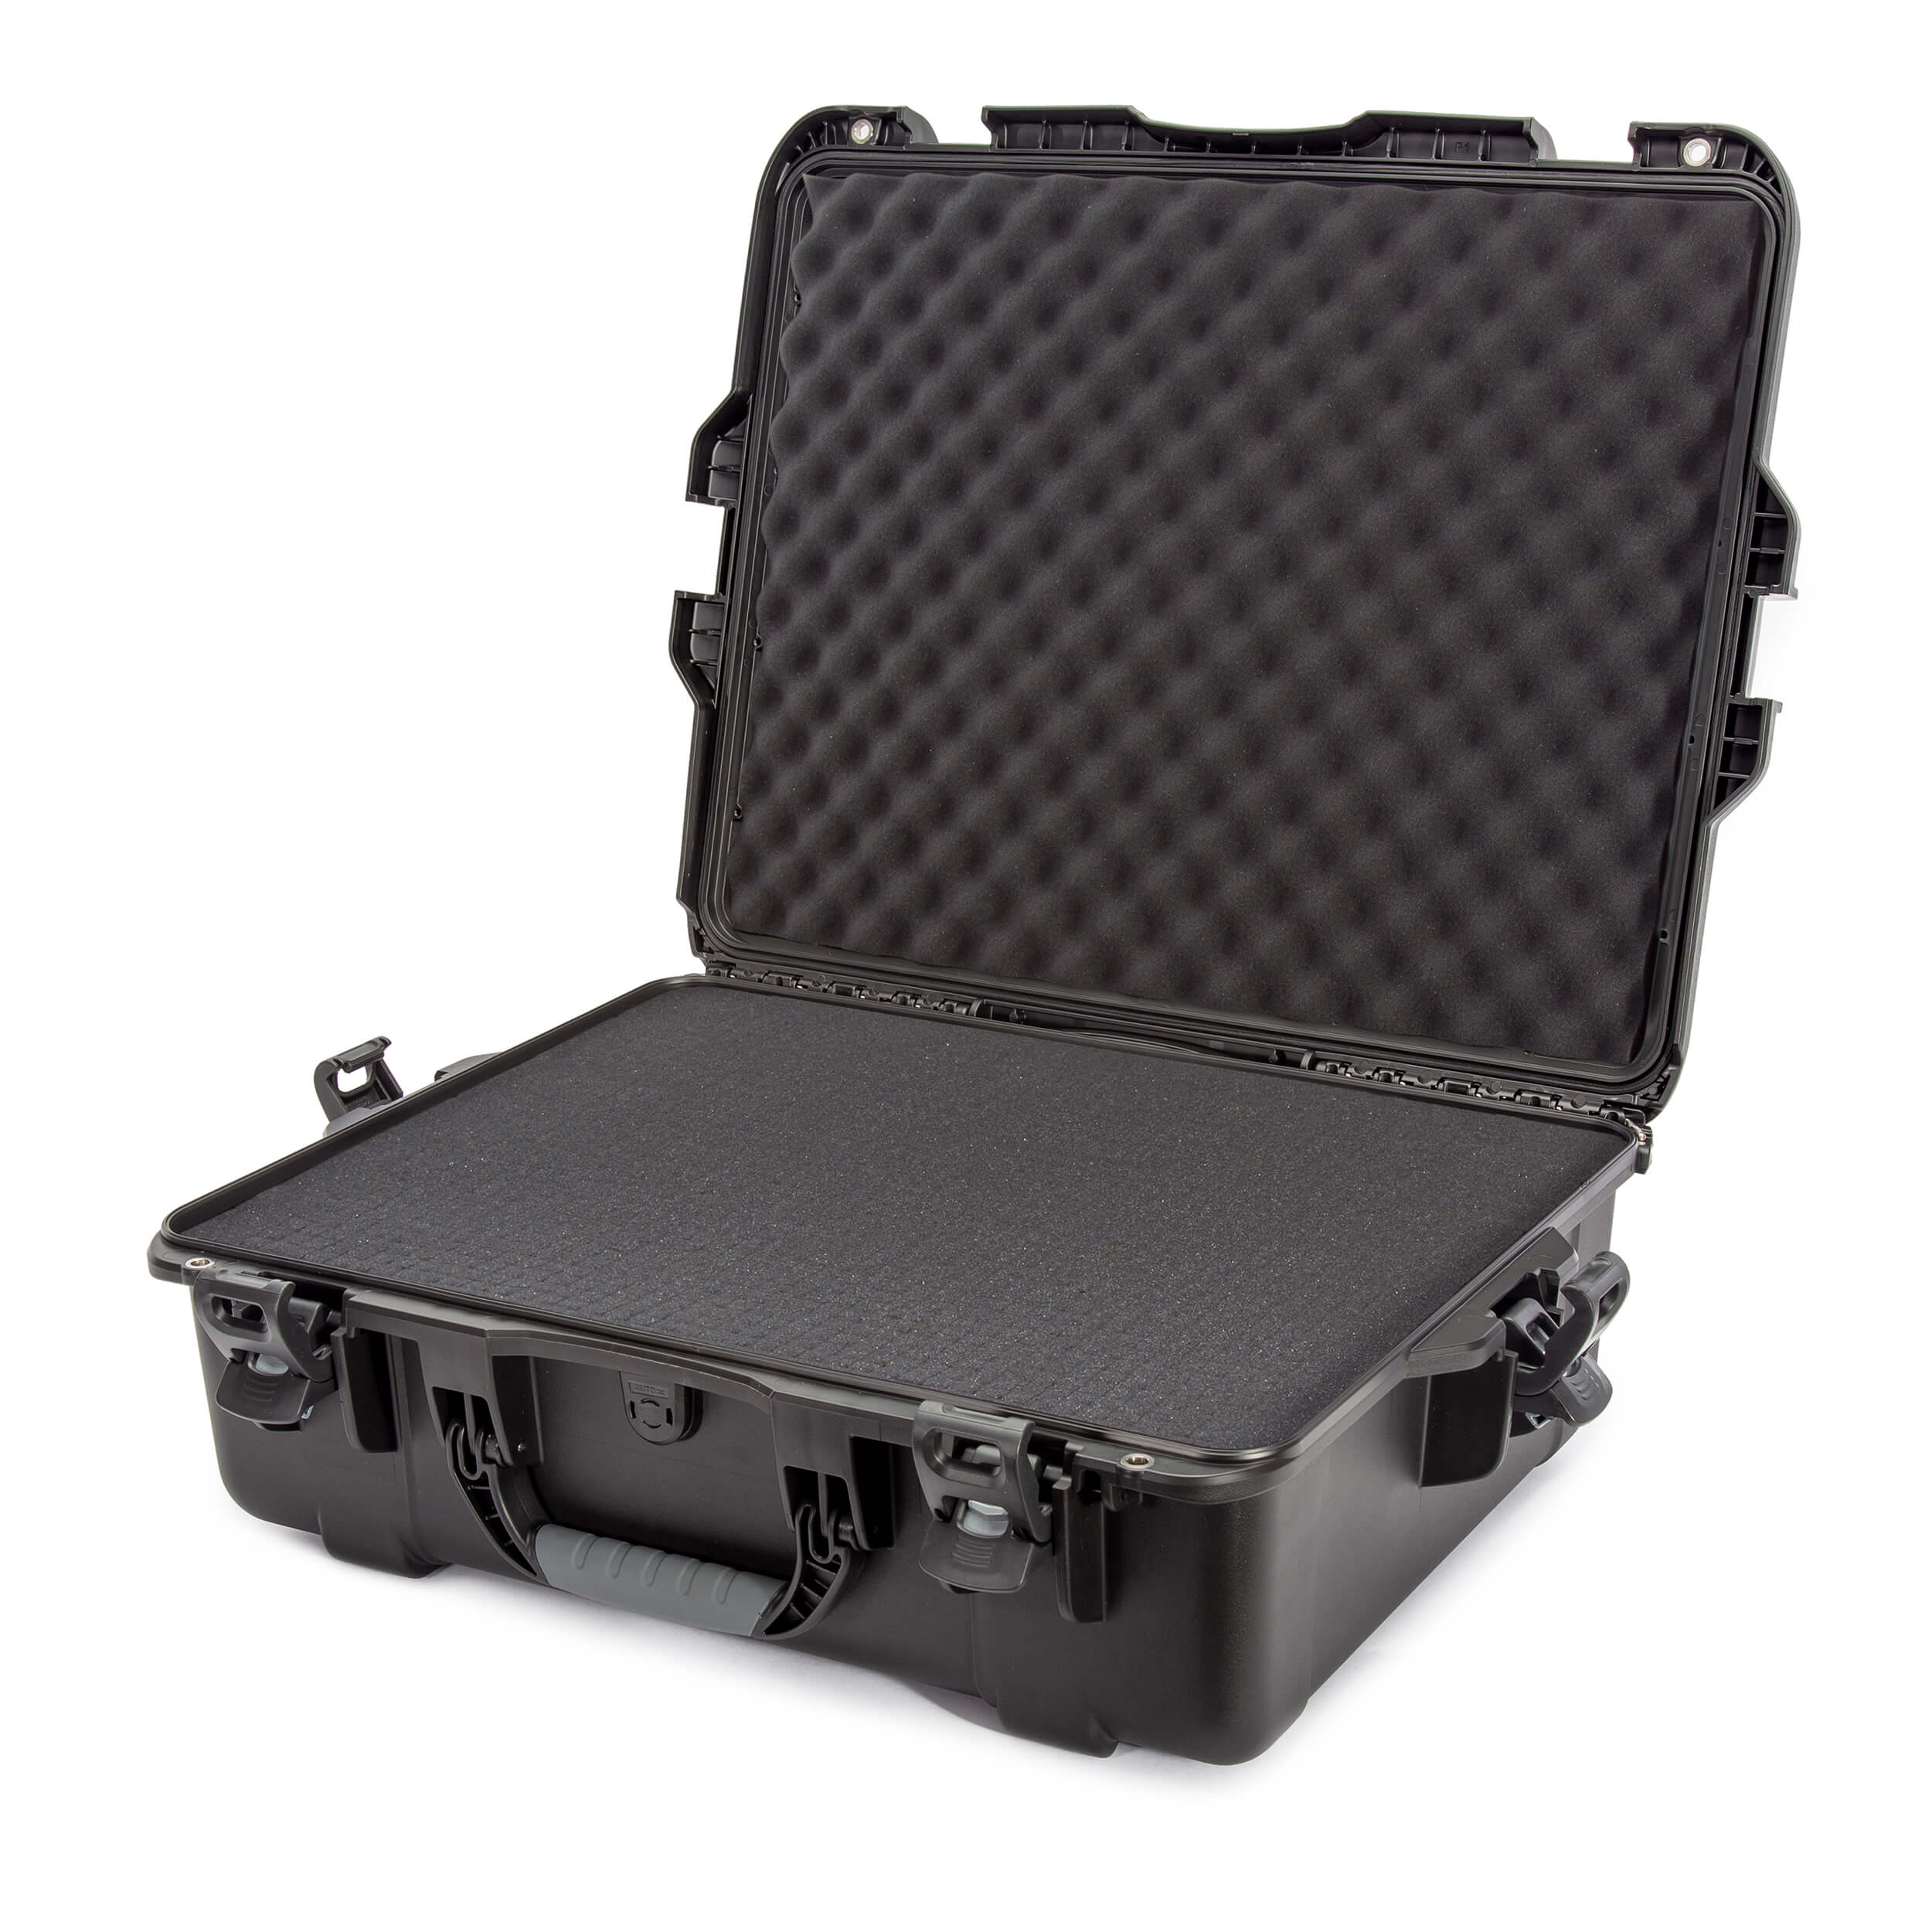 Pelican Case 1610 - Kaizen Foam Inserts  Kaizen foam inserts for tool  boxes and other cases